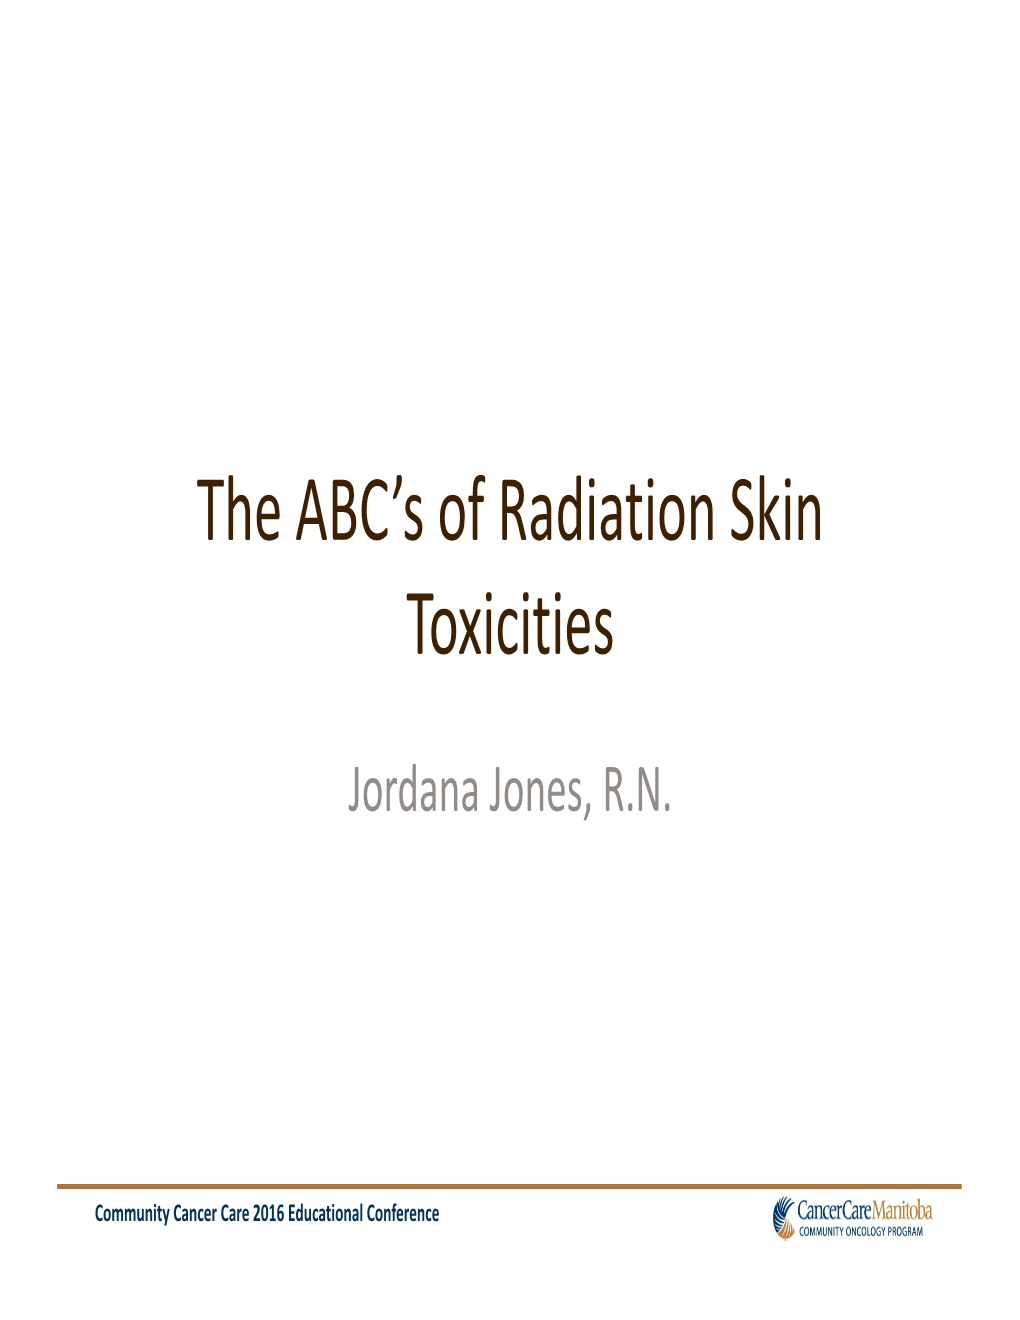 The ABC's of Radiation Skin Toxicities